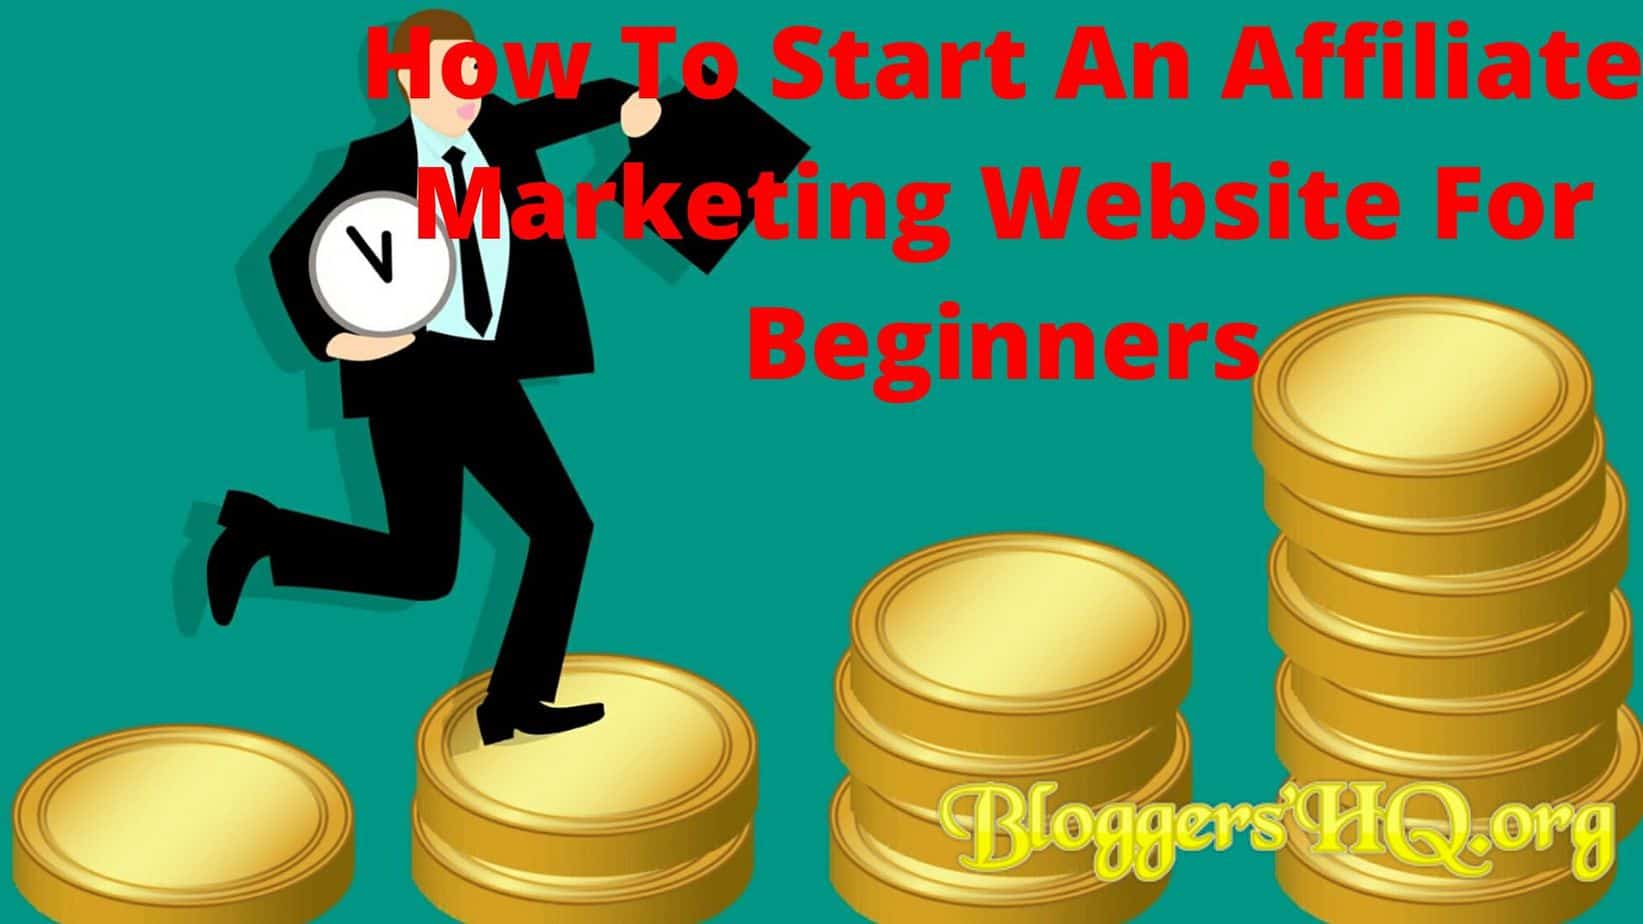 How To Start An Affiliate Marketing Website For Beginners